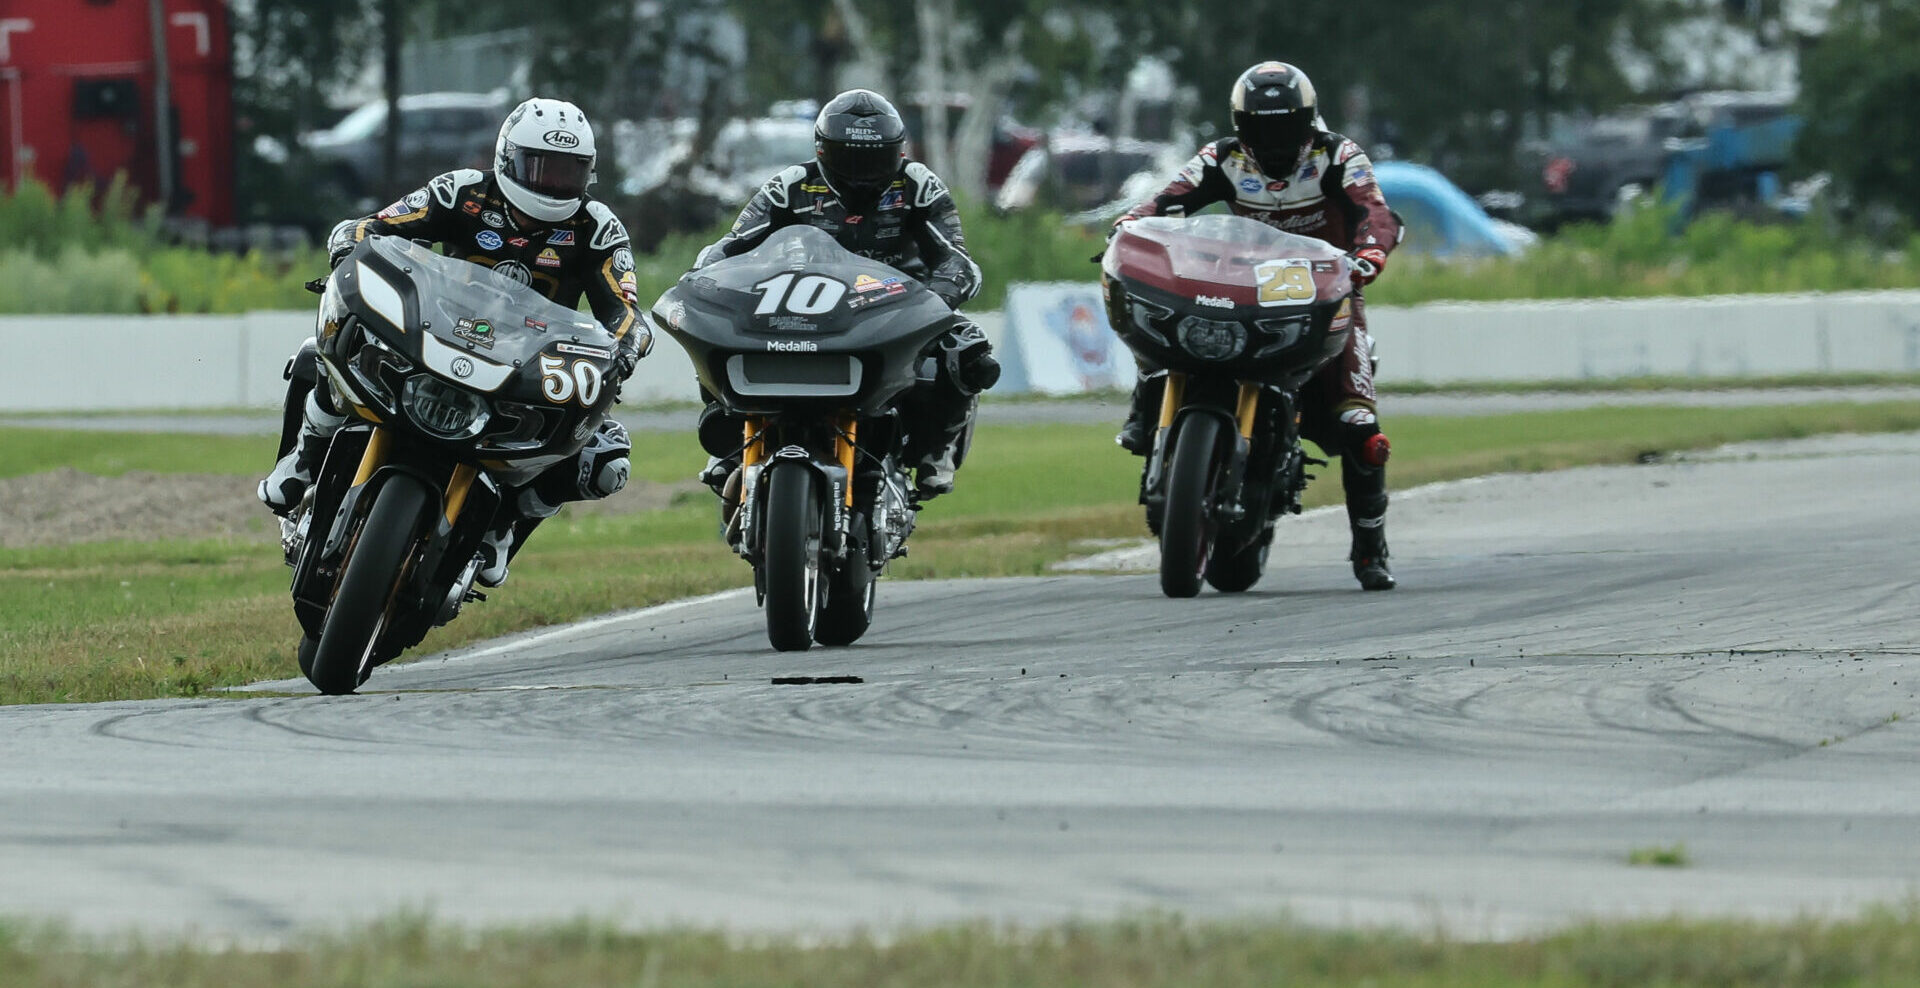 Bobby Fong (50) beat Travis Wyman (10) and Tyler O'Hara (29) to win his first Mission King Of The Baggers race at Brainerd International Raceway. Photo by Brian J. Nelson, courtesy MotoAmerica.